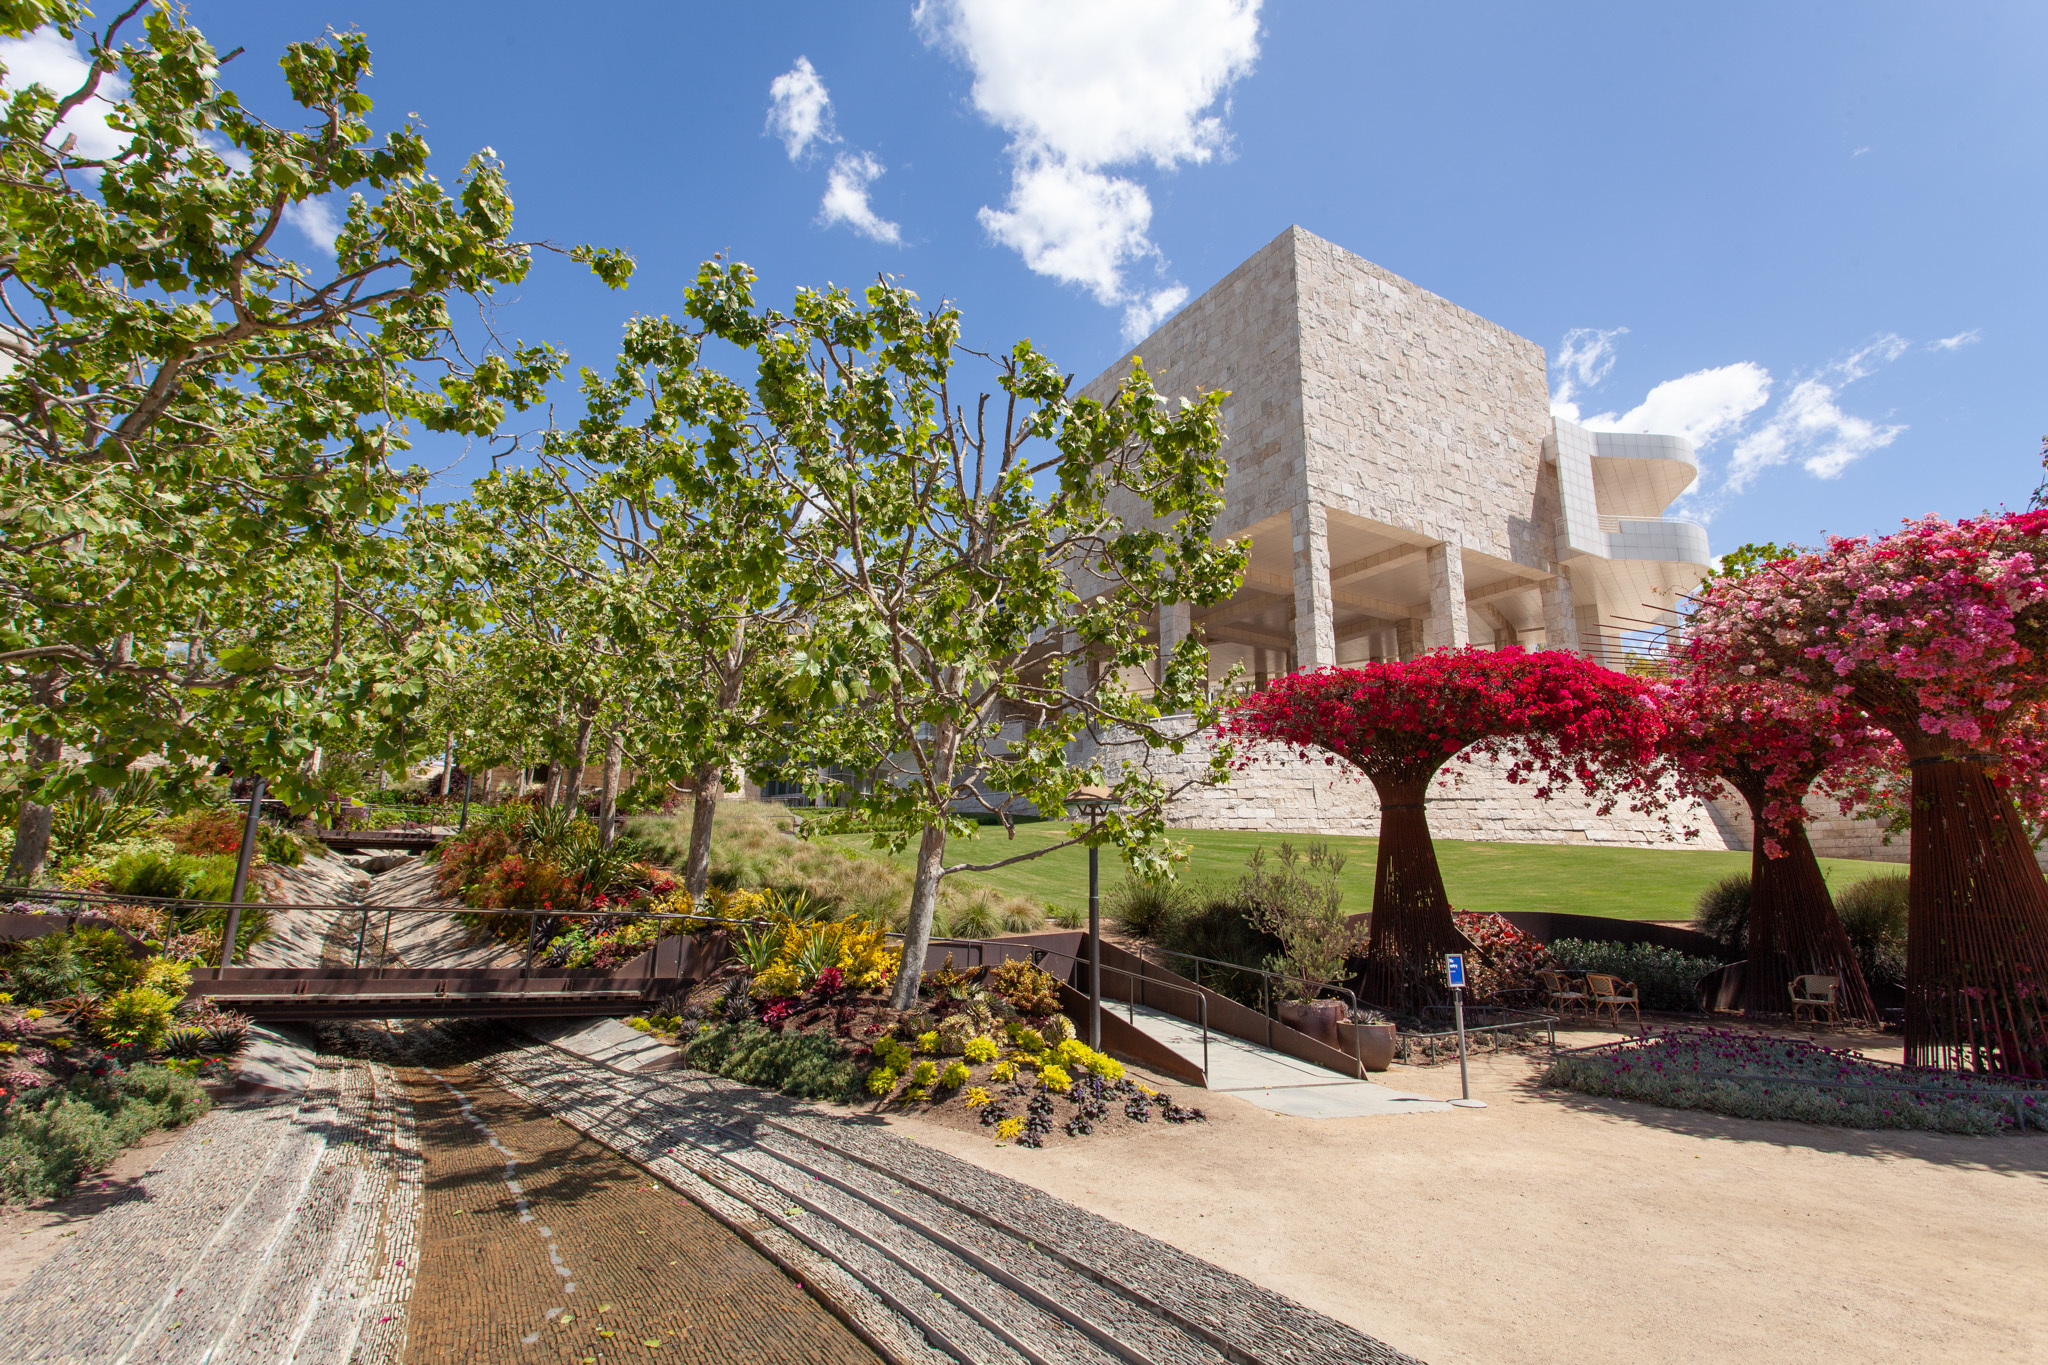 LA's Getty Center is turning 20. The cultural hub continues to